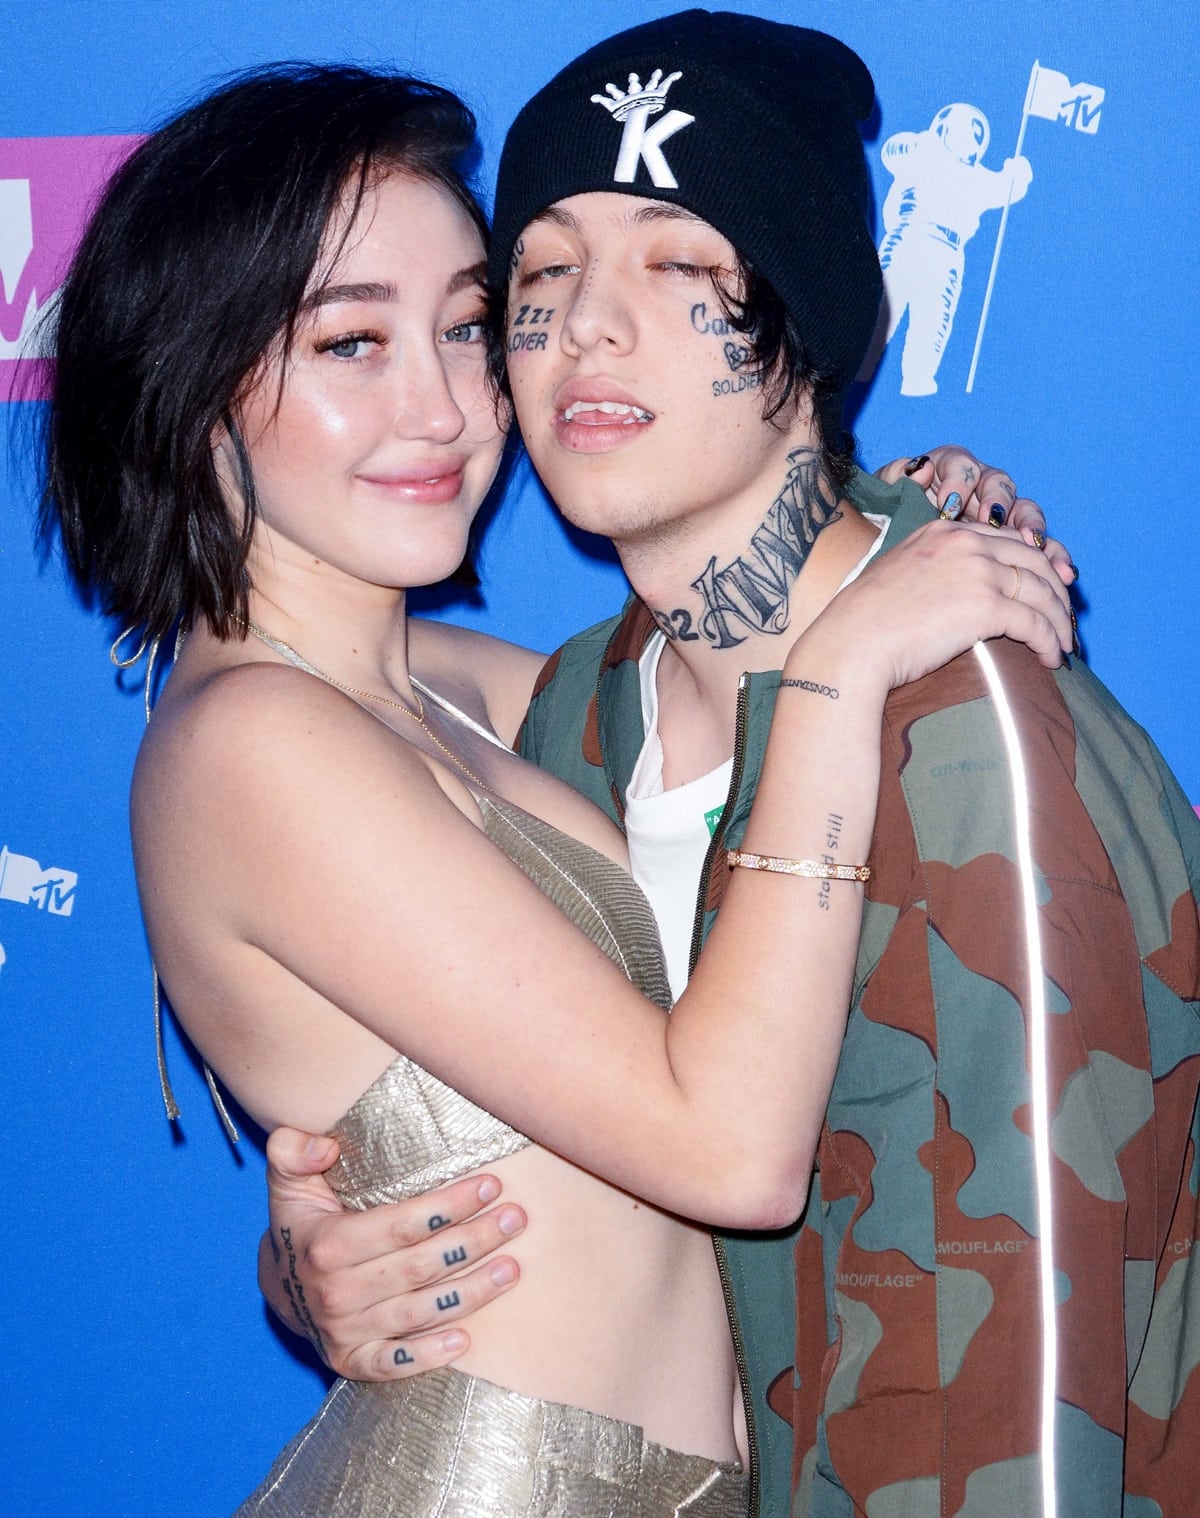 Noah Cyrus split from Nicholas Diego Leanos, better known as Lil Xan or simply Diego, in September 2018